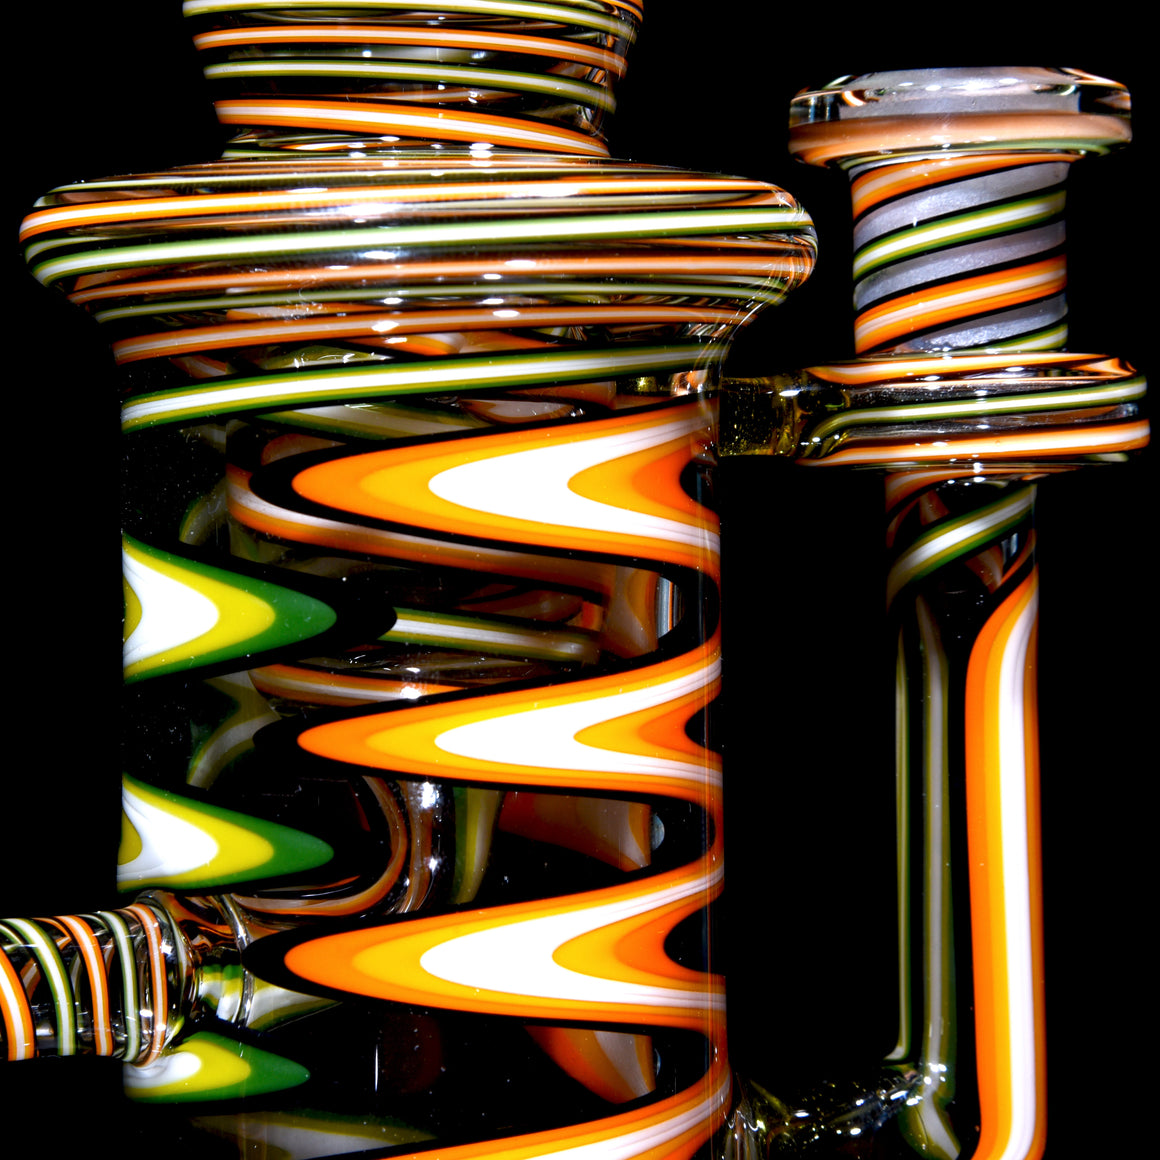 Fully-Lineworked Klein Recycler - Chronic Dreamsicle - 14mm Female